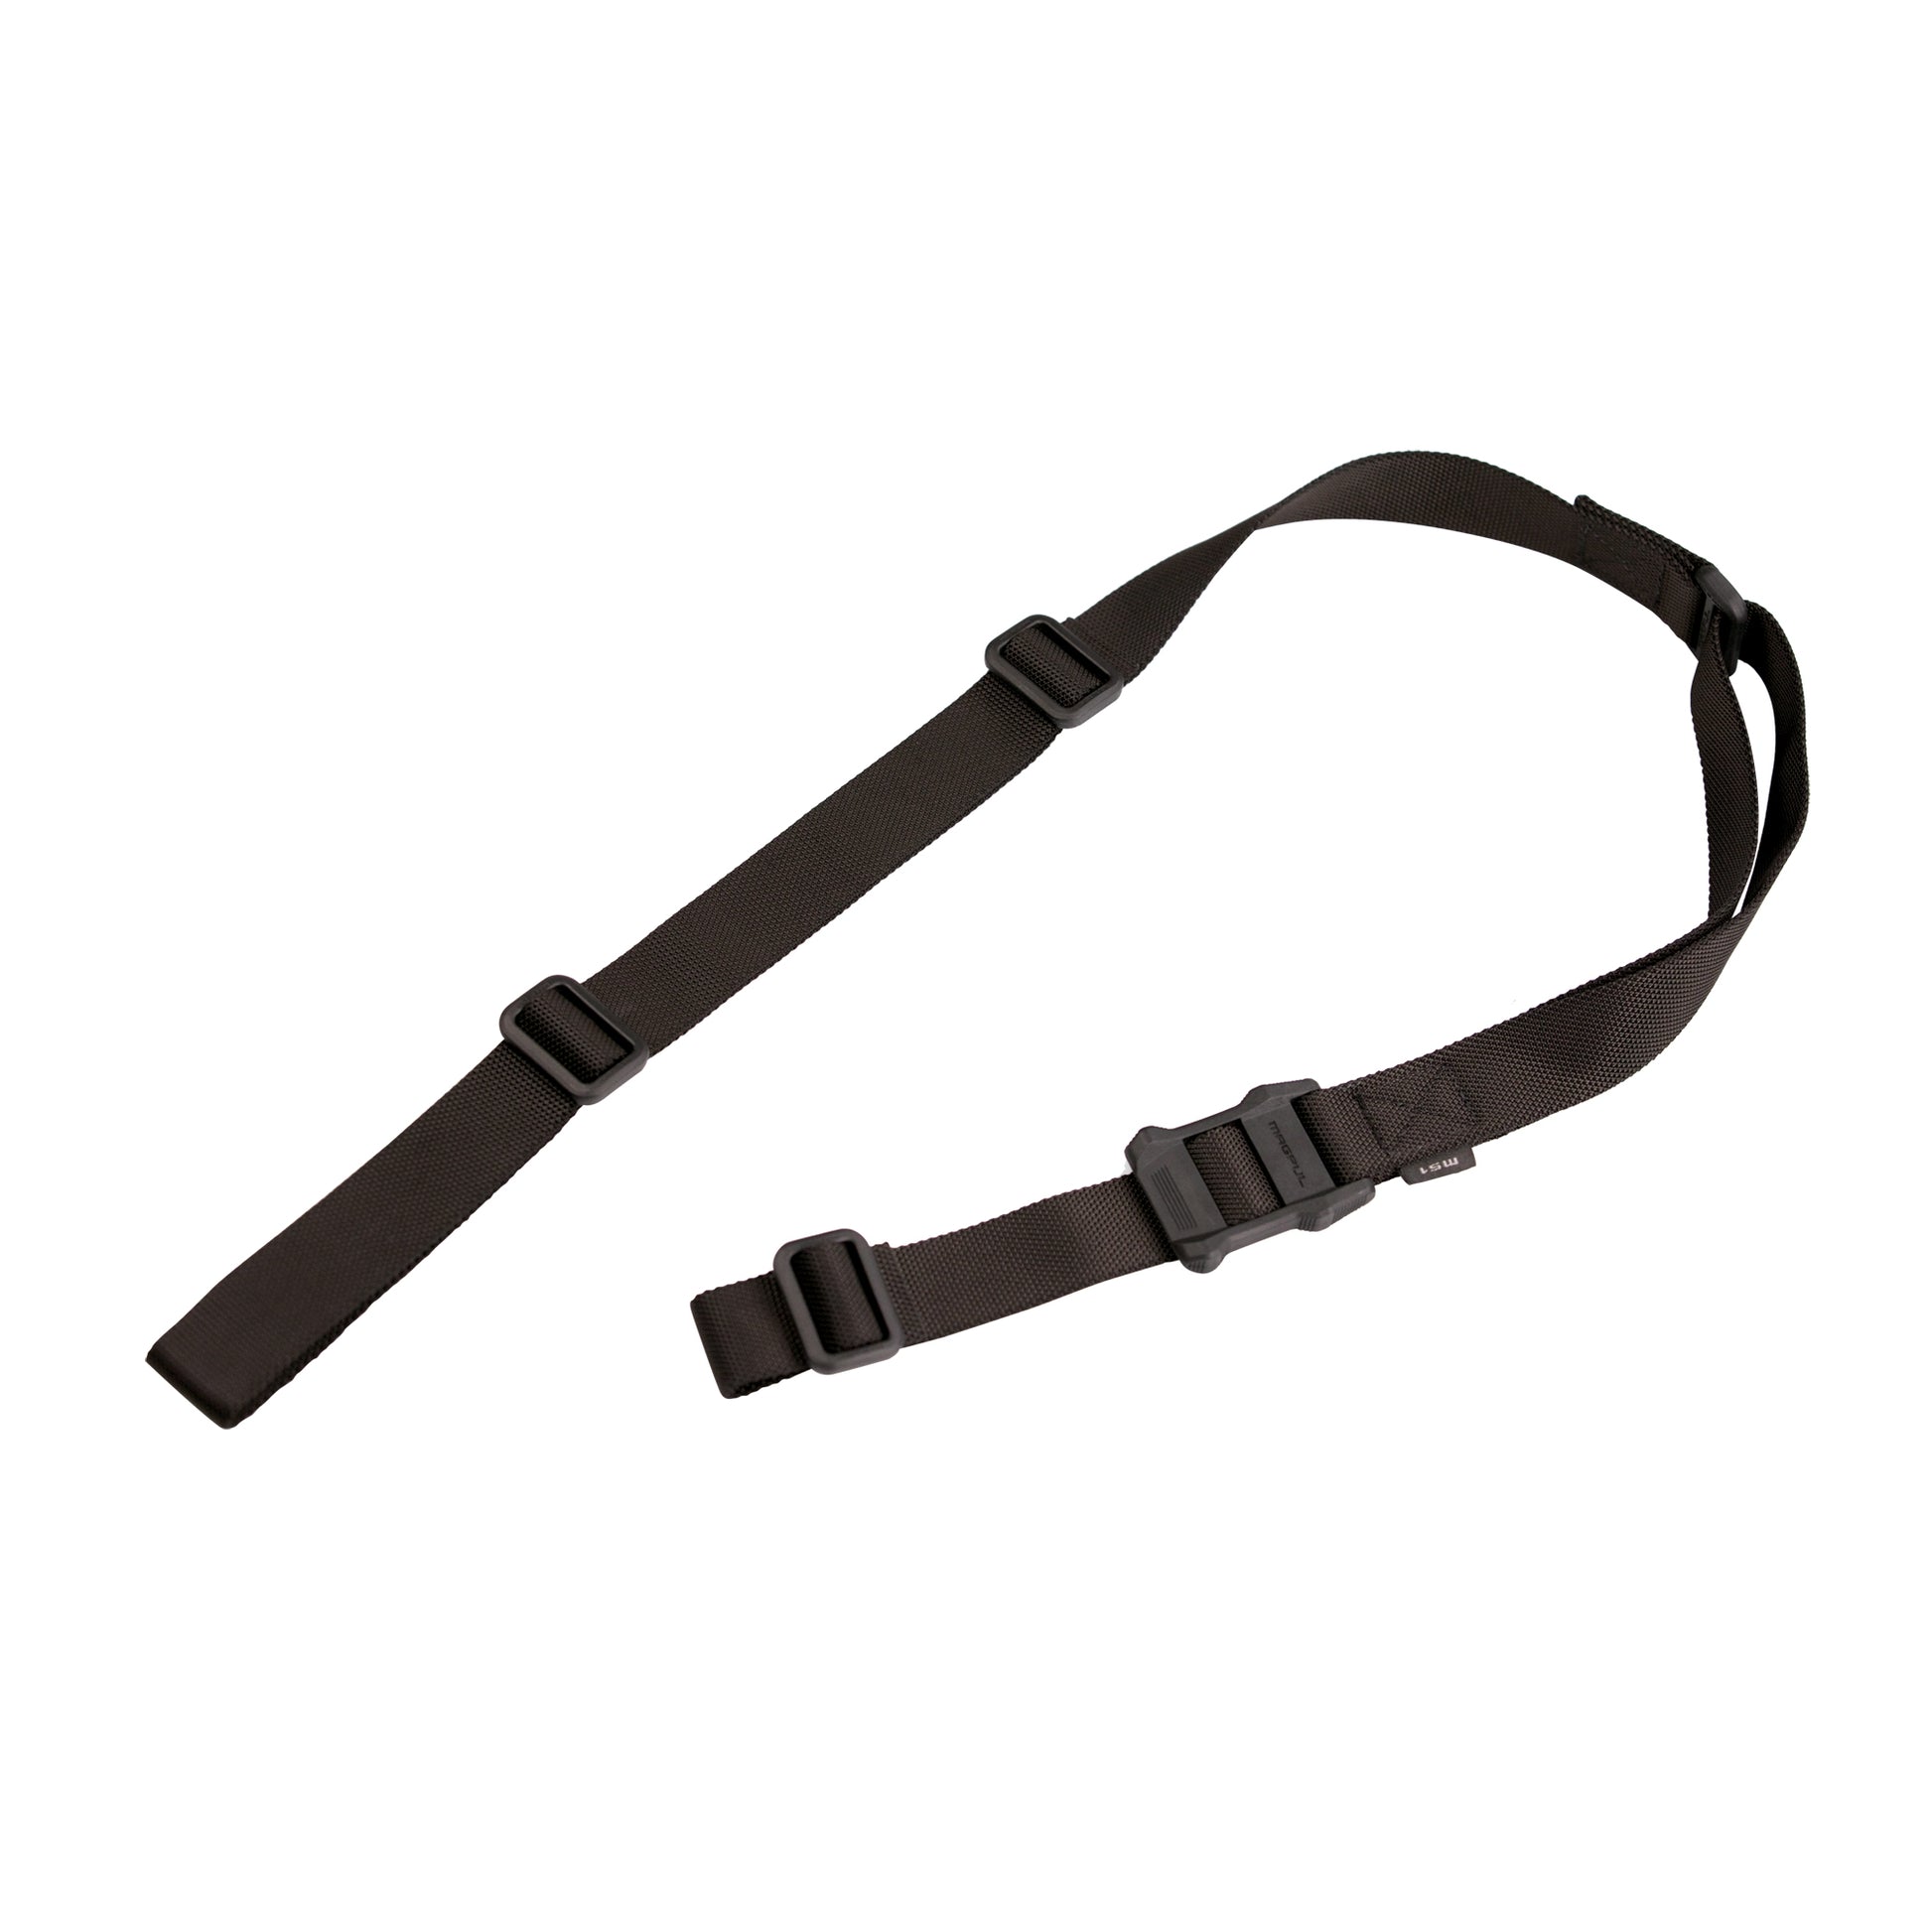 Magpul Industries MS1 Sling Fits Rifles 1 or 2 Point Sling Black MAG513-BLK - California Shooting Supplies